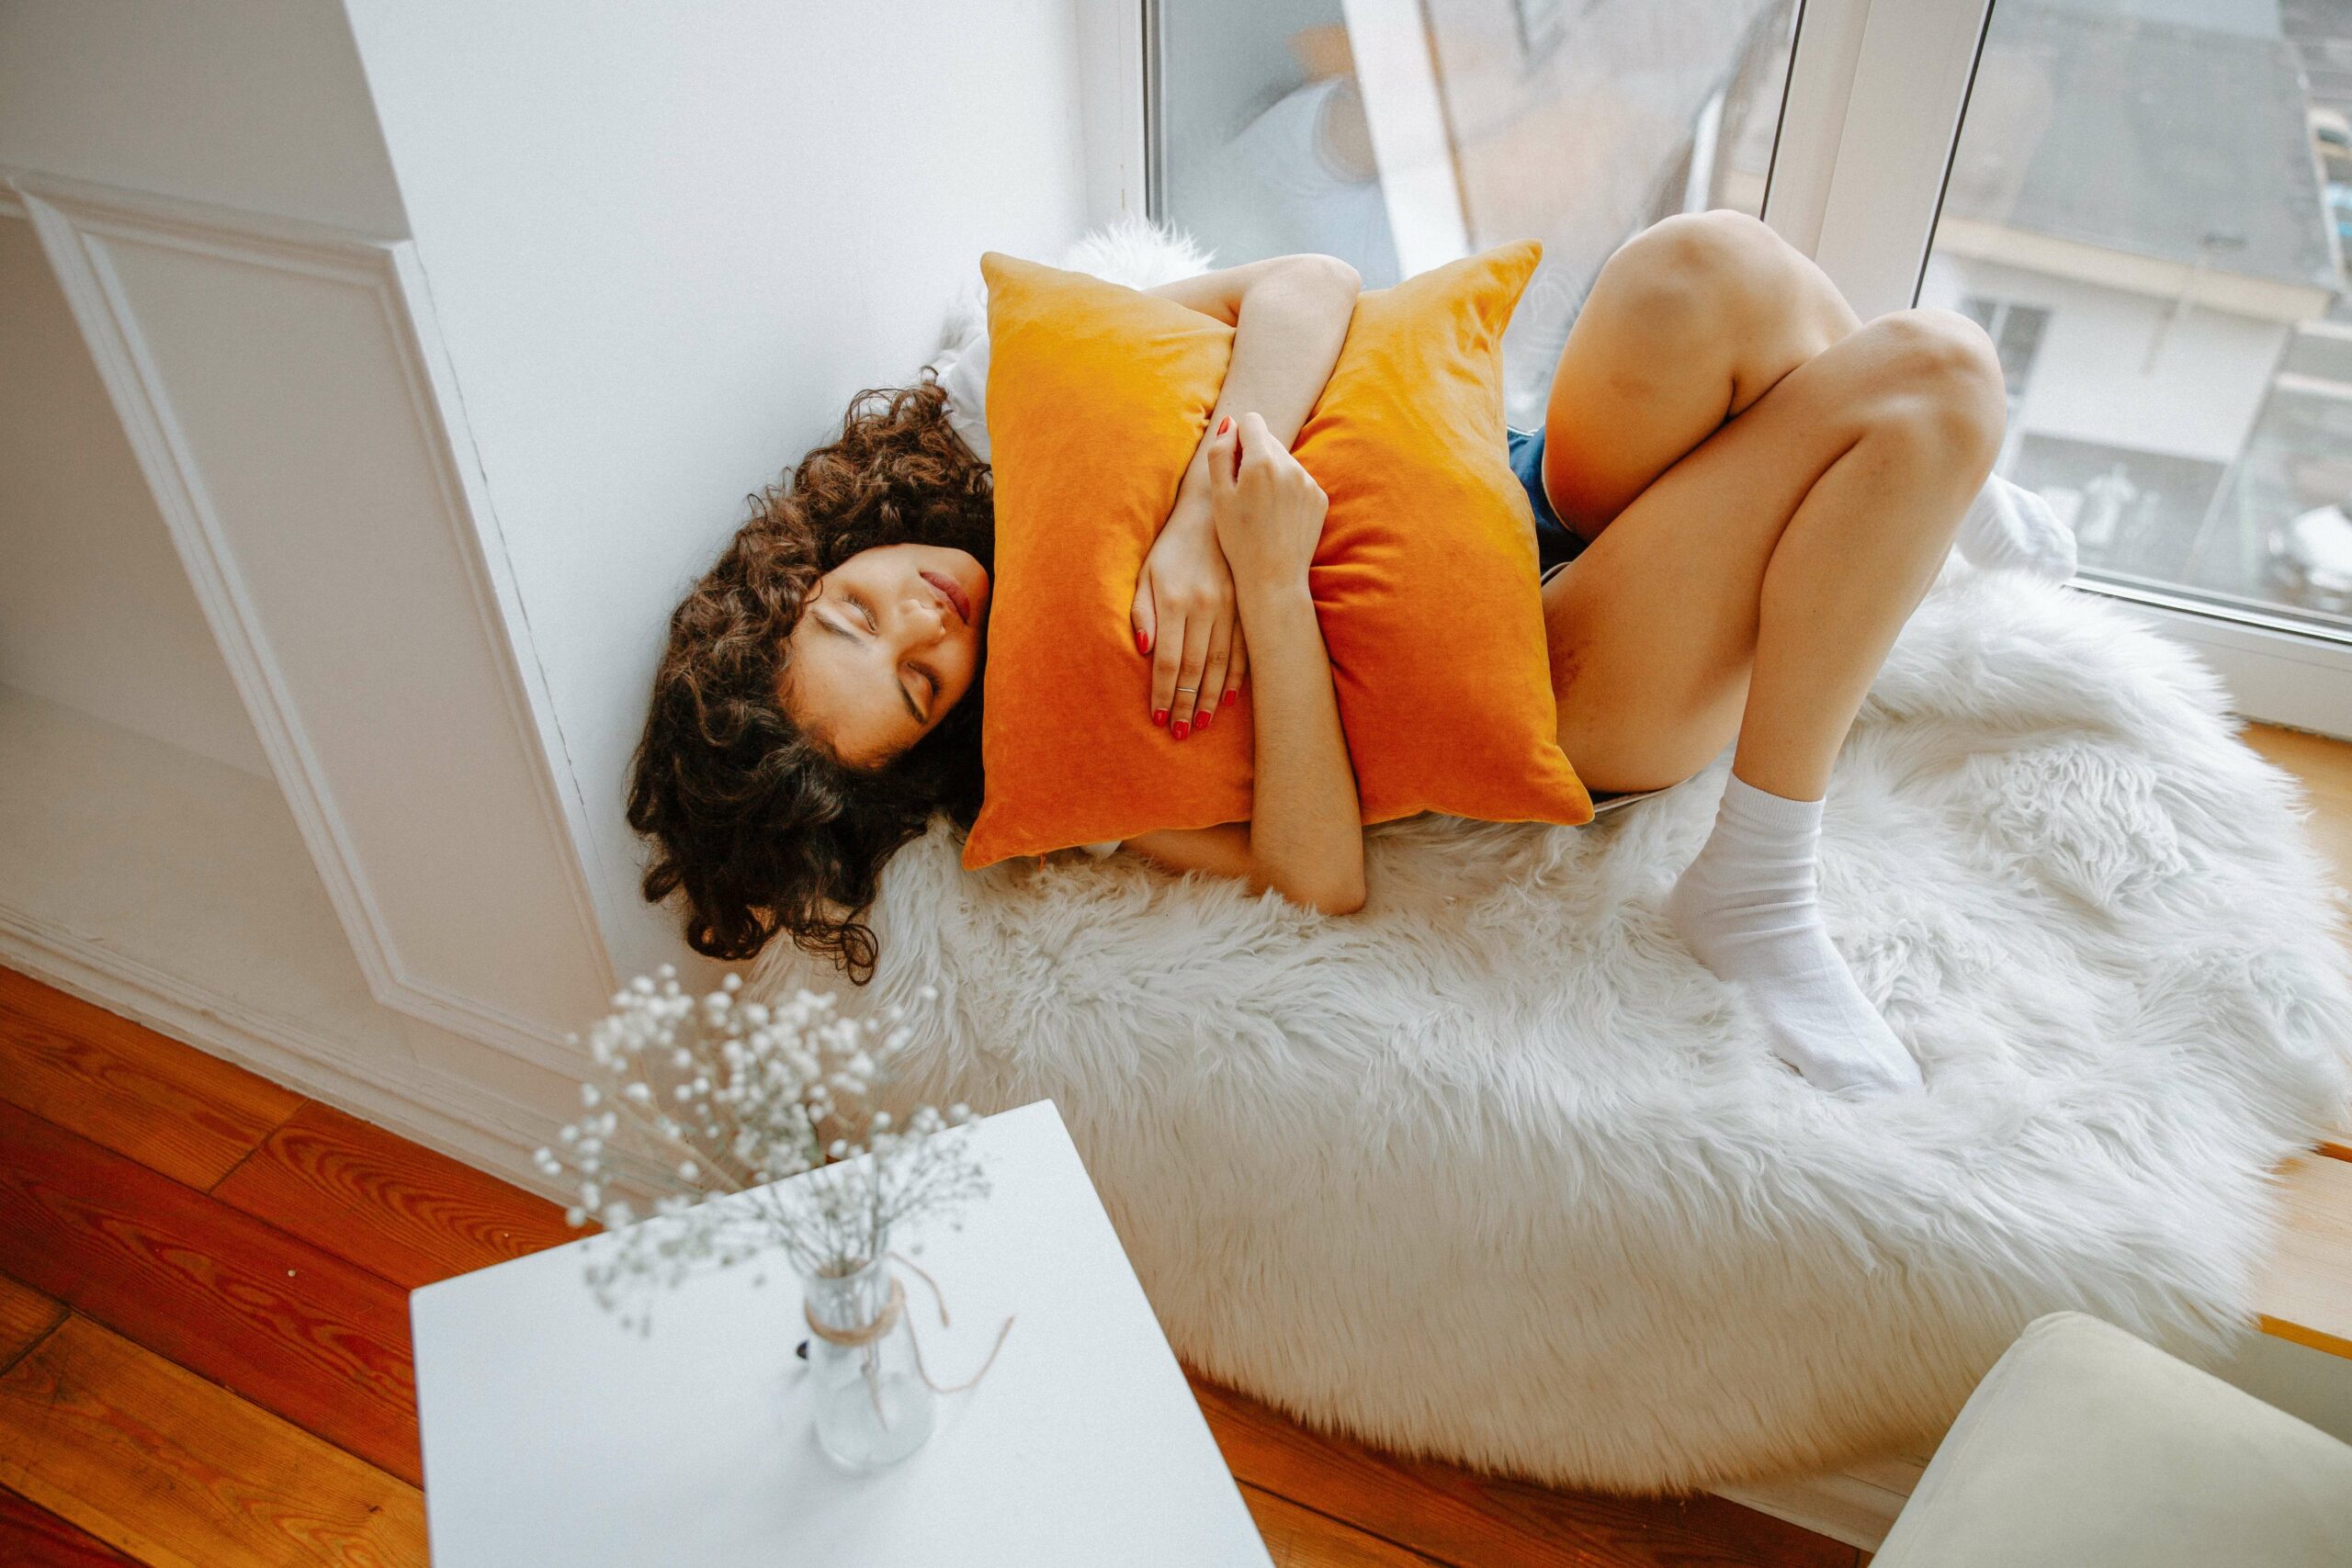 A woman snuggles with an orange pillow as she struggles with abdominal pain. Don't let IBS control your life, find relief in Pelvic Floor Physical Therapy in Washington, DC.